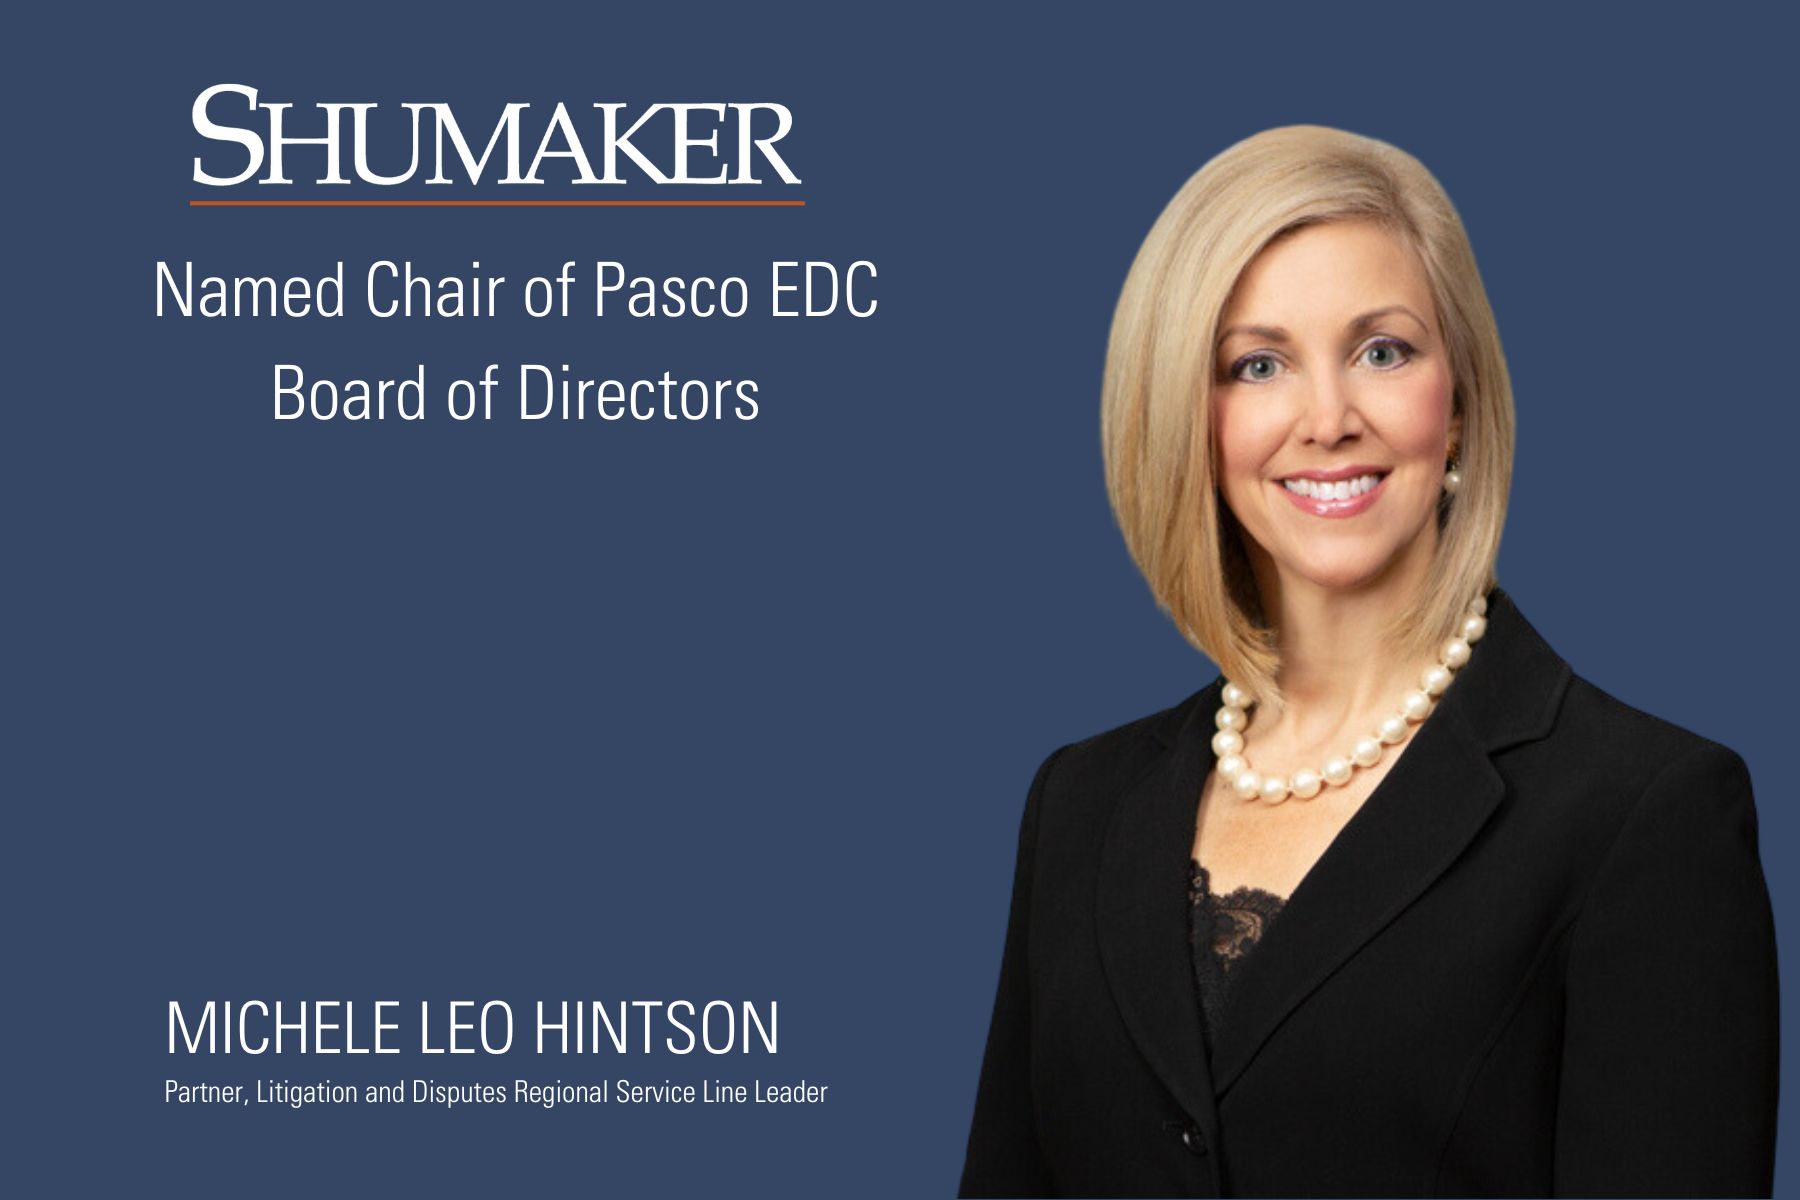 Michele Leo Hintson to Help Lead Pasco EDC’s Mission of Stimulating Balanced and Diversified Business Growth; Named Chair of Pasco EDC Board of Directors 